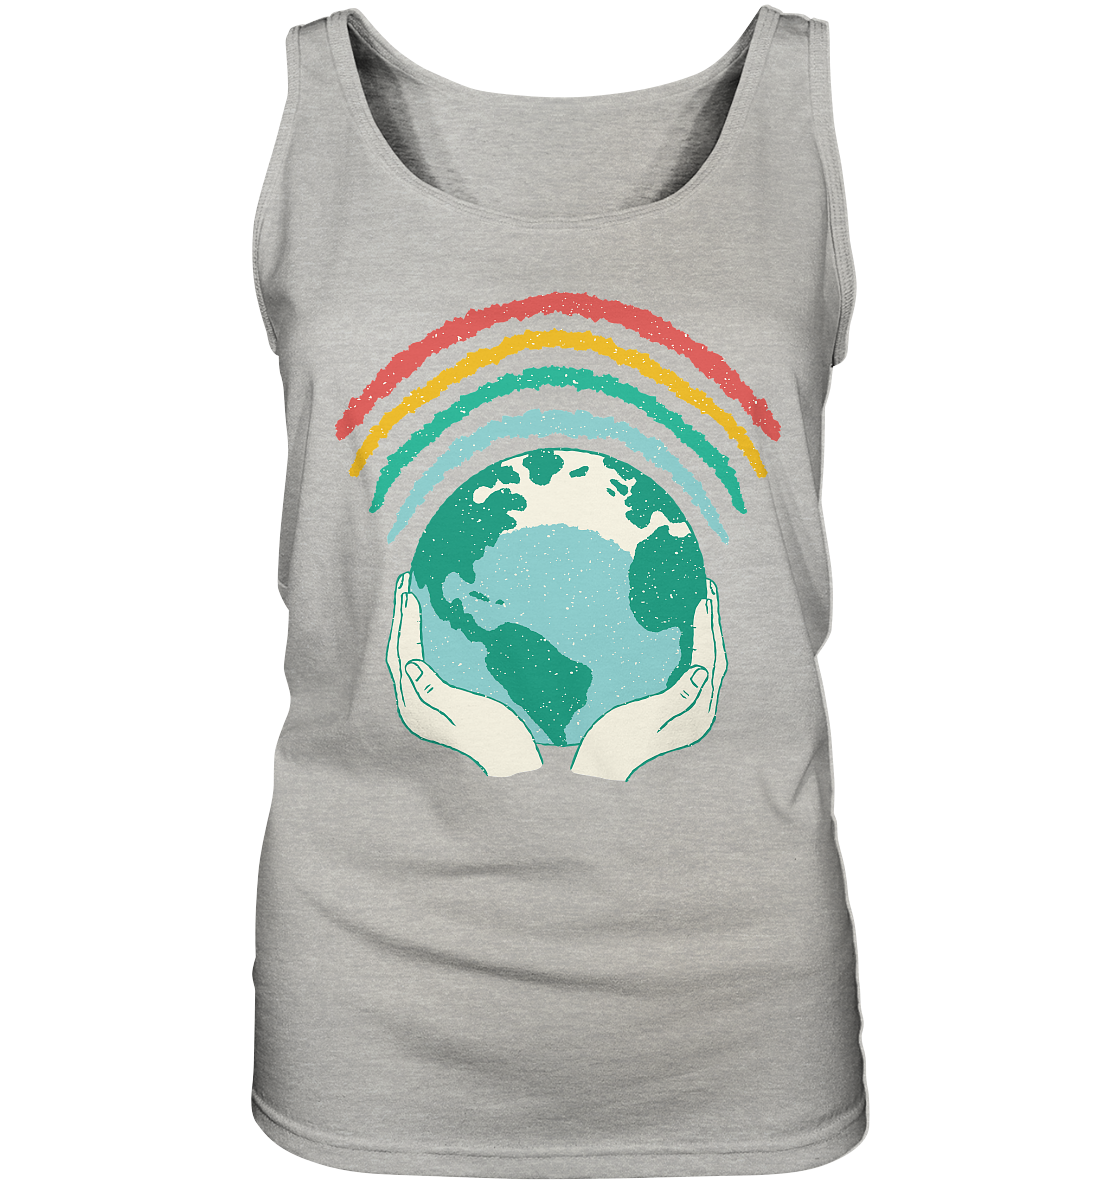 Rainbow with globe in hands - ladies tank top